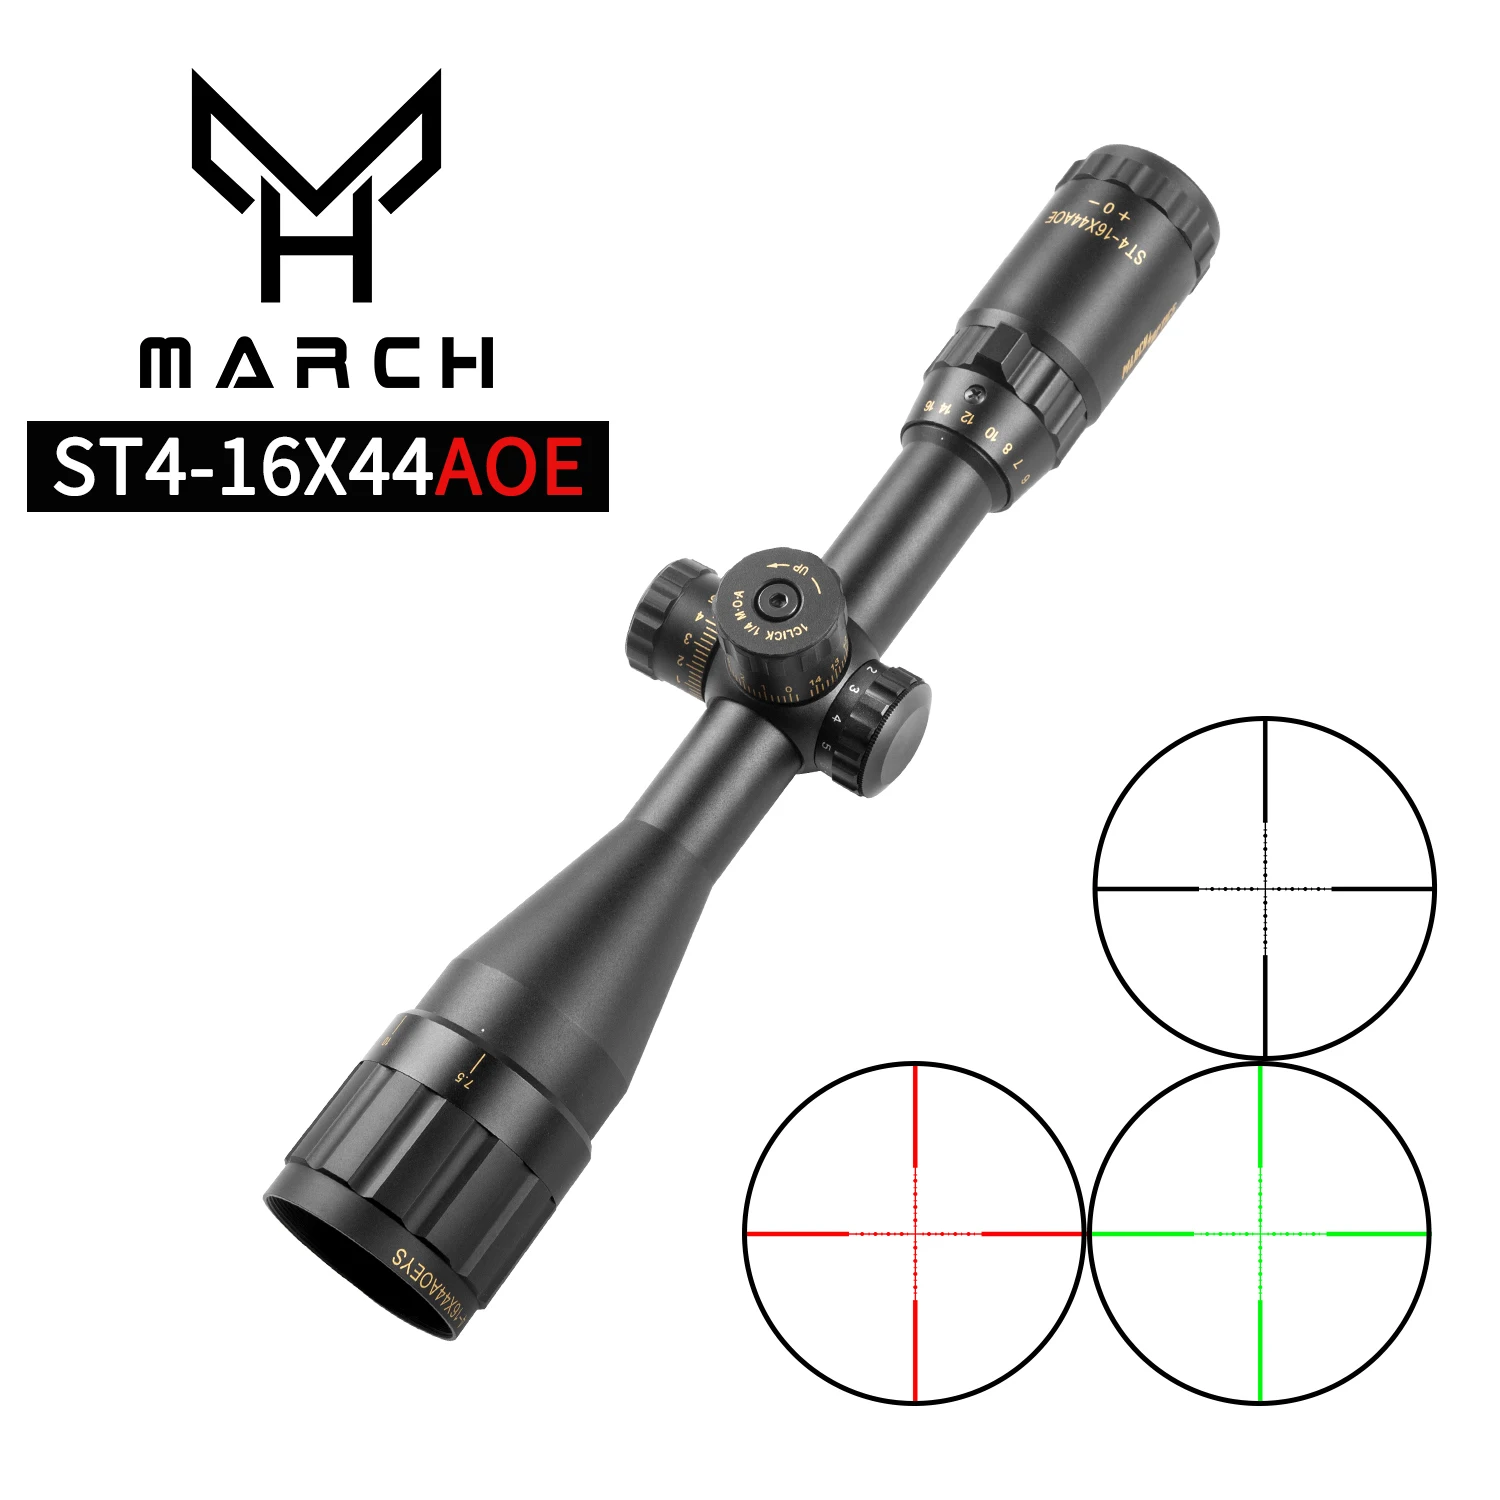 

MARCH ST 4-16x44 AOE OPTICS Tactical Sight Green Red Illuminated Rifle Scope Sniper Airsoft Air Guns Riflescope For Hunting